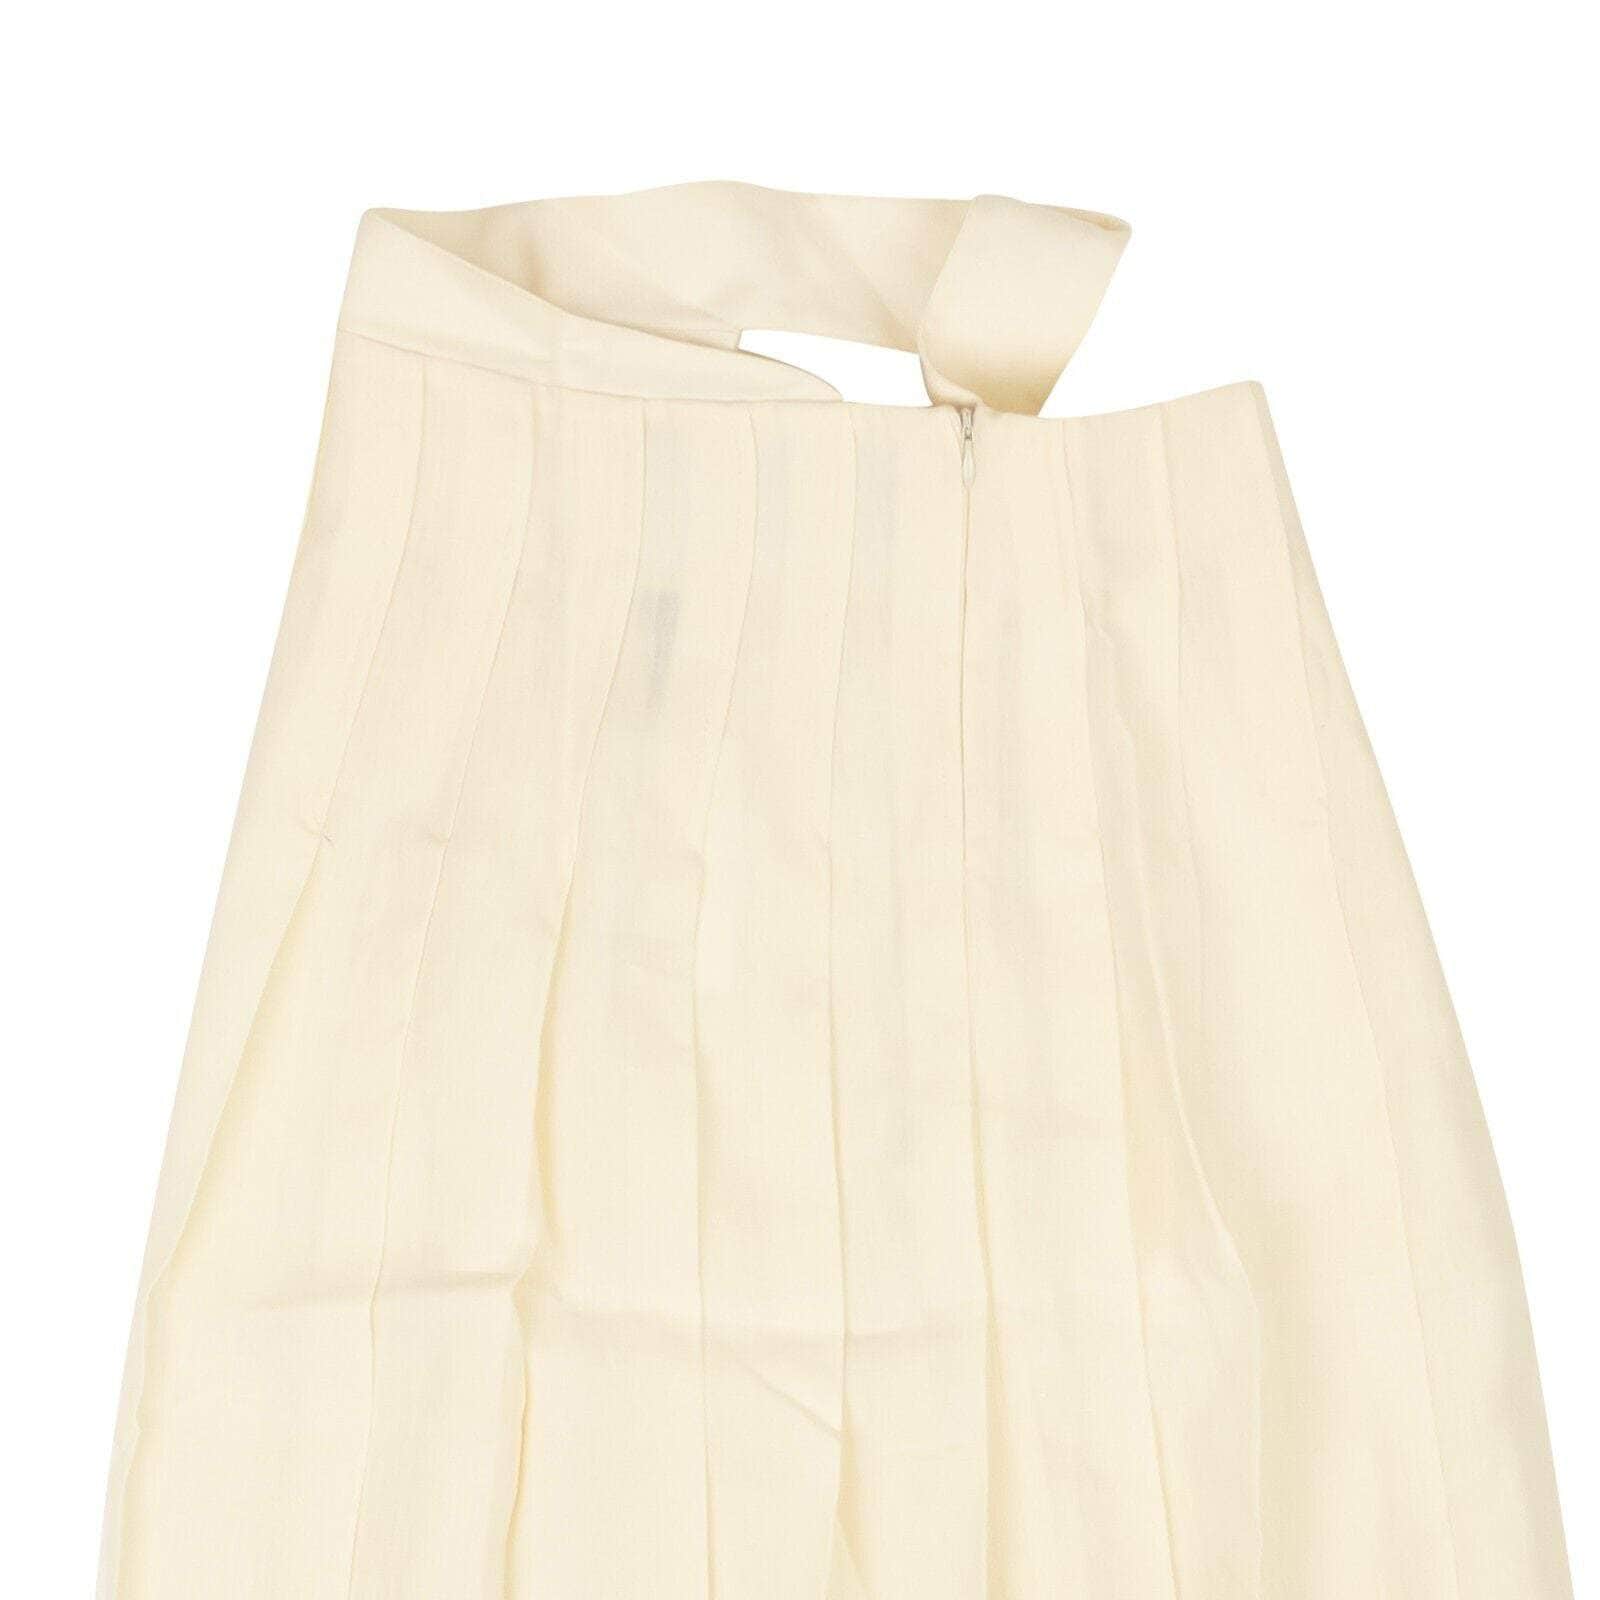 Jacquemus 250-500, channelenable-all, chicmi, couponcollection, gender-womens, main-clothing, size-34, size-36, size-38, size-40, womens-pleated-skirts Light Beige Linen La Jupe Plissee Flared Skirt